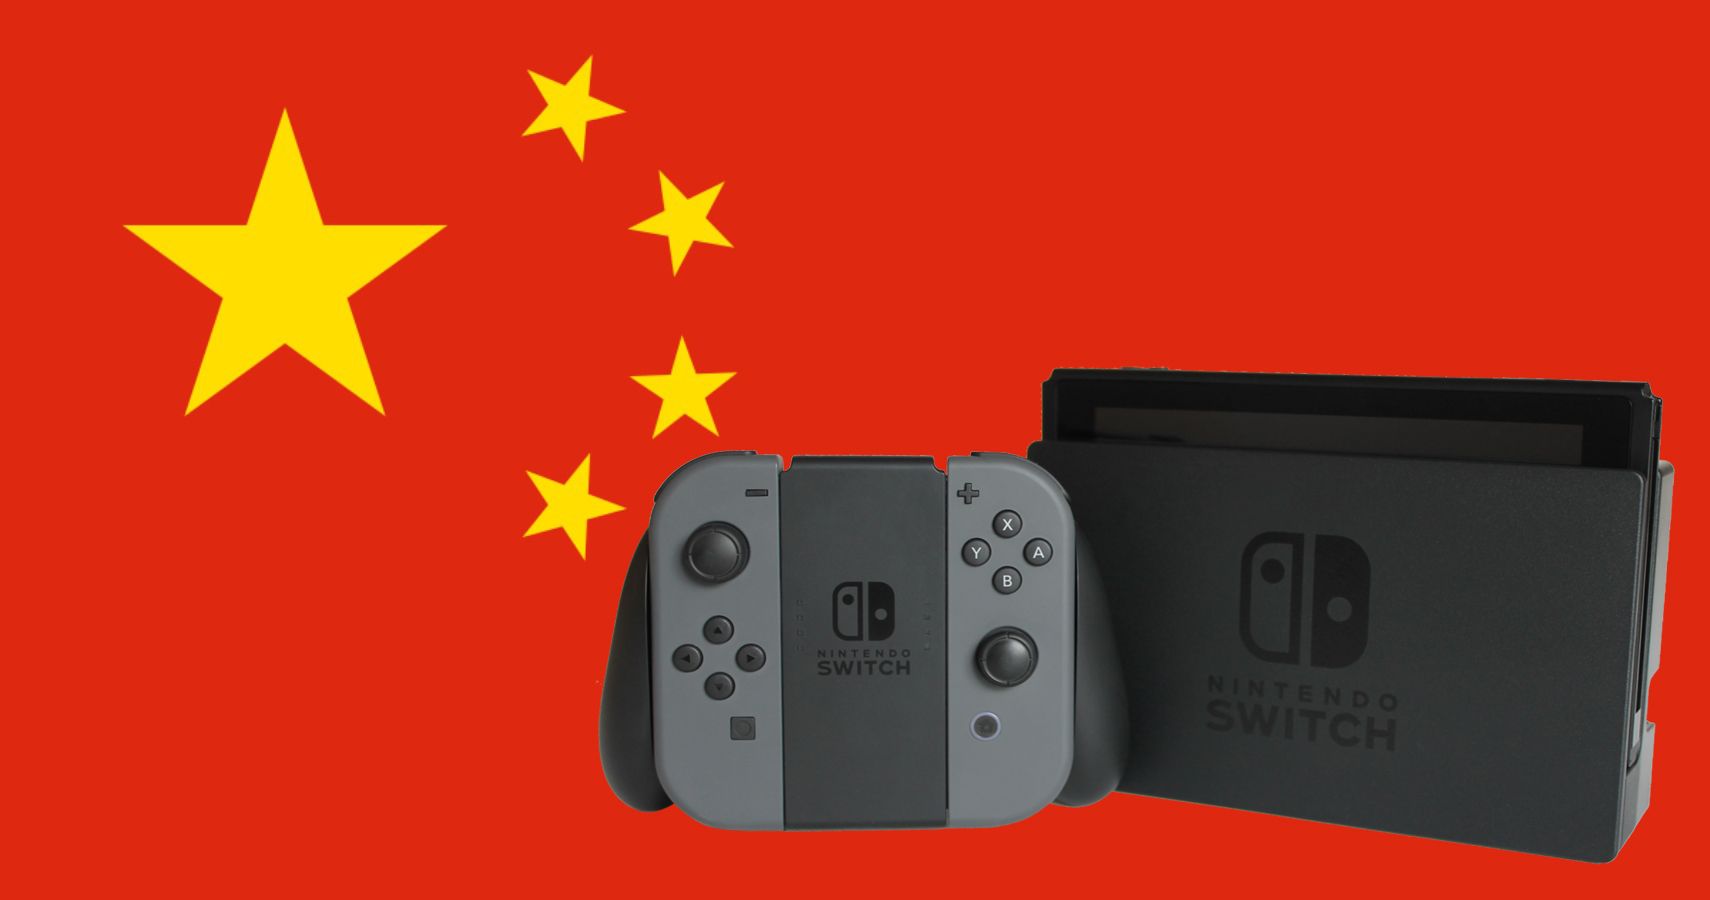 nintendo switch in chinese